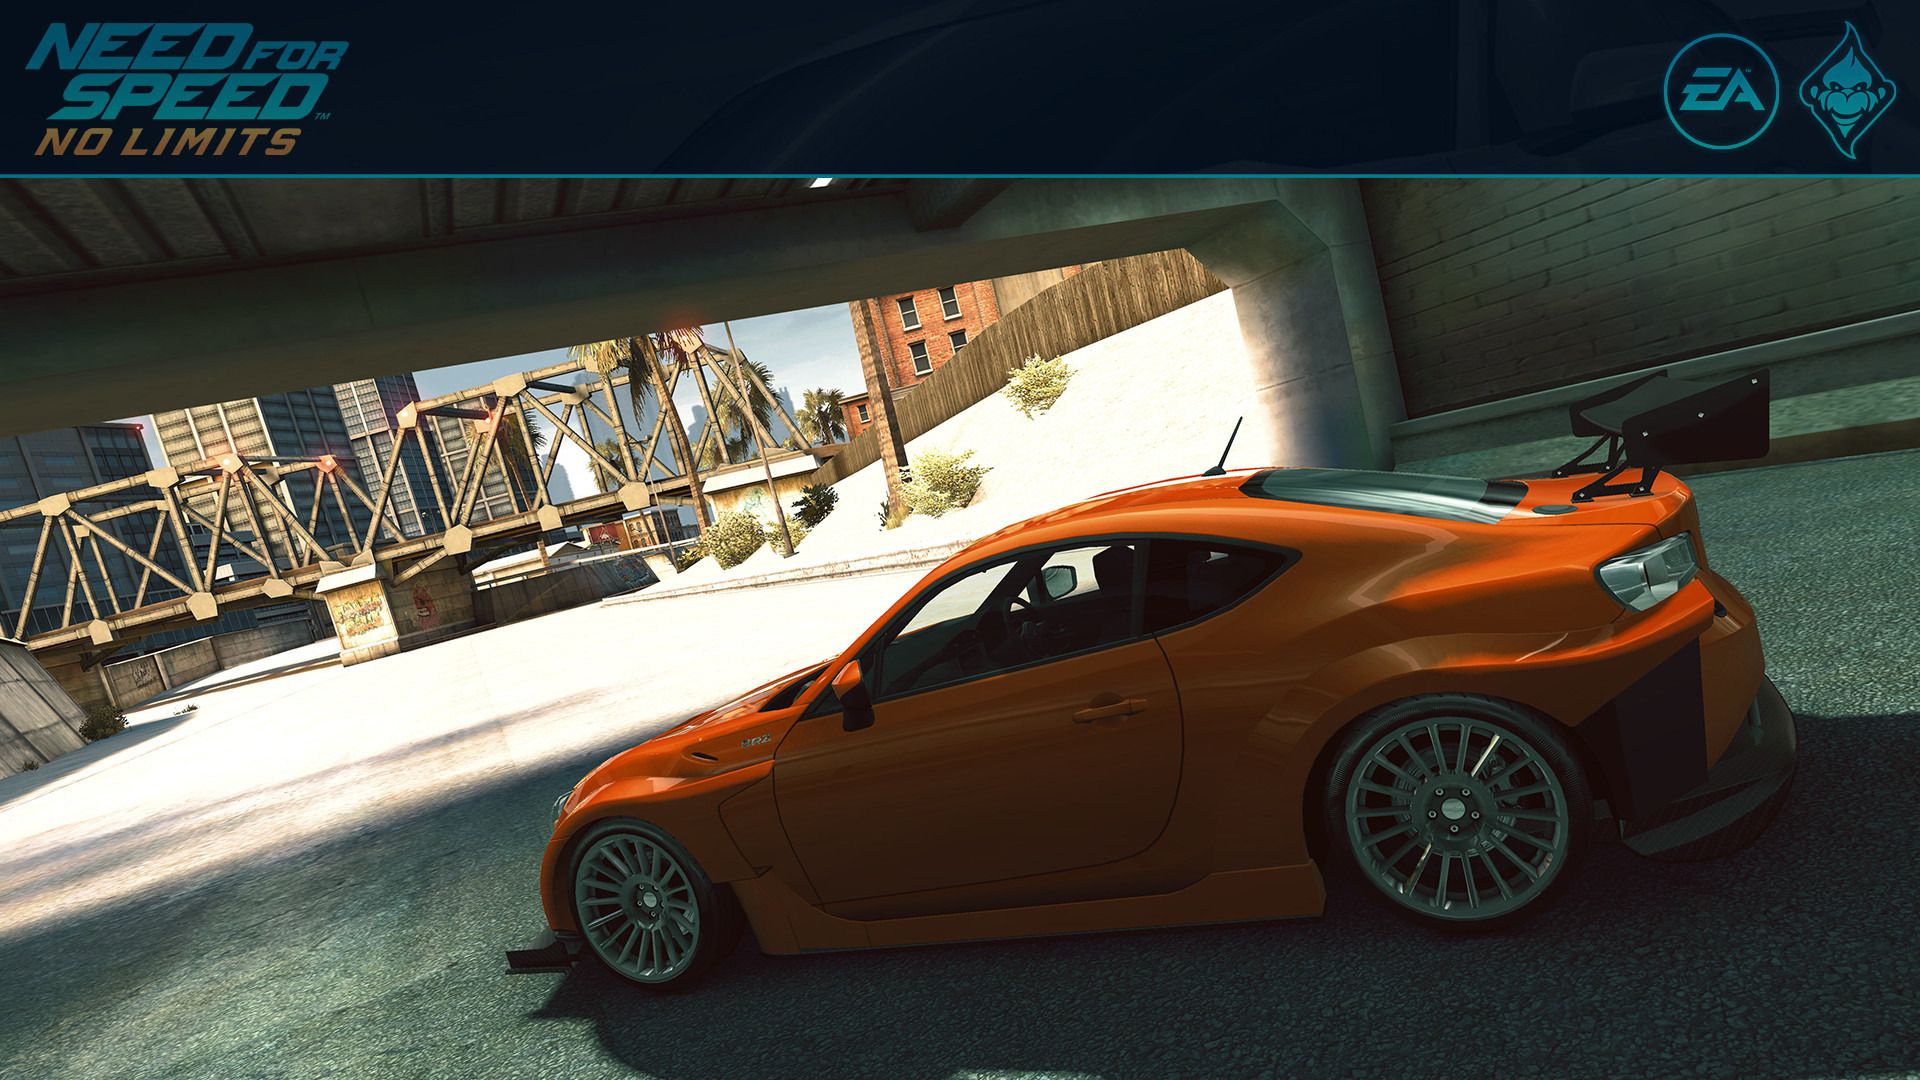 Need for Speed: No Limits, Video games, Car, Vehicle, Tuning